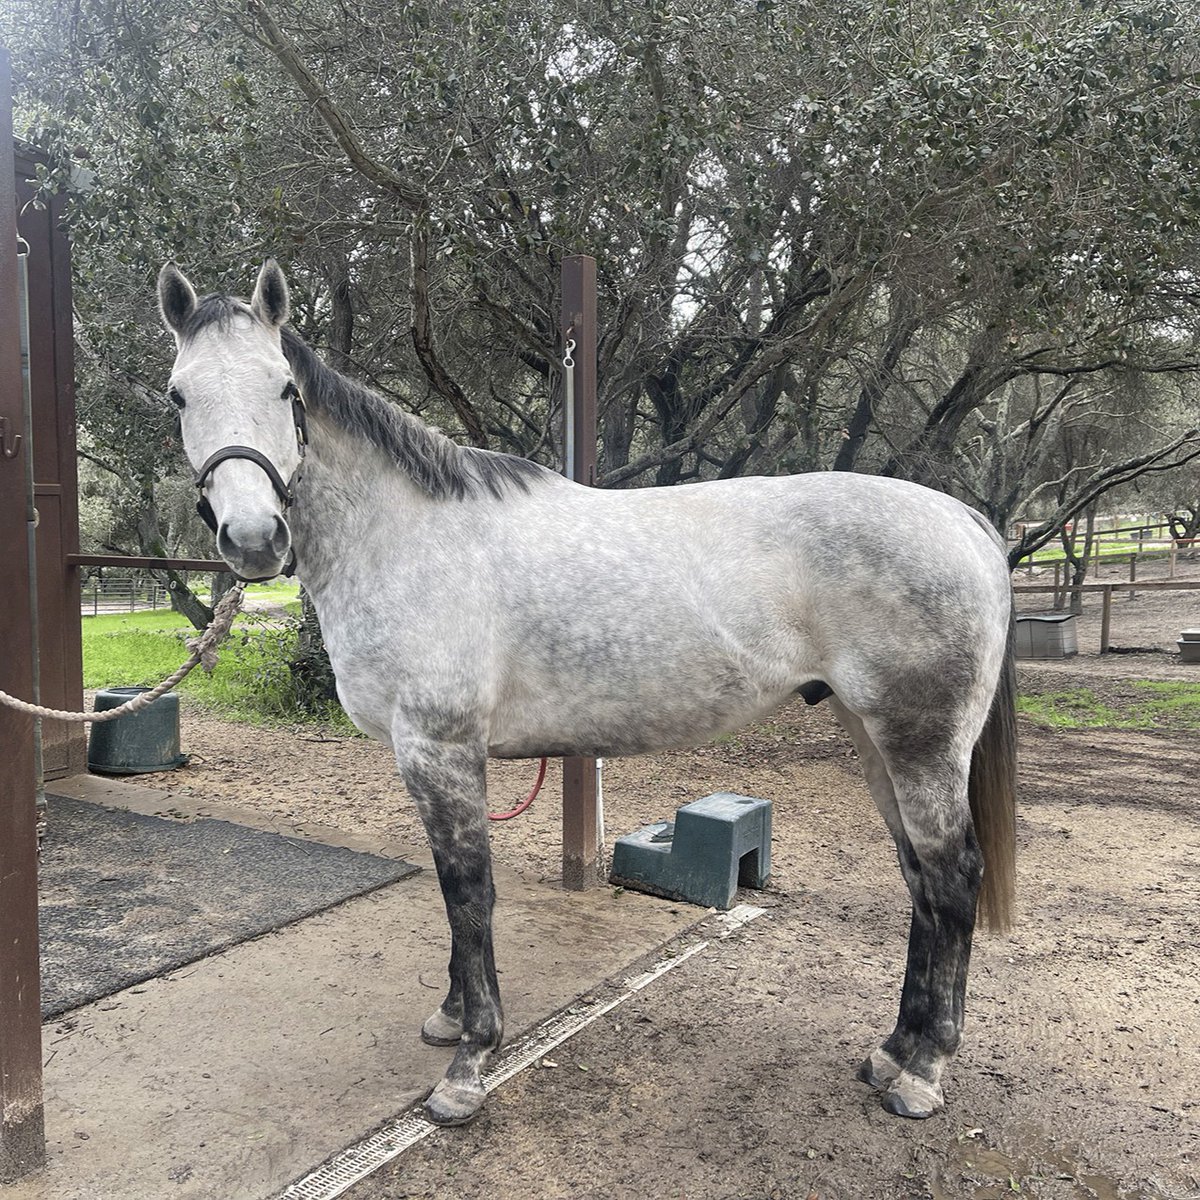 Marisa felt an immediate connection when she first rode Jonny Be Bueno at Redwings Horse Sanctuary. From their initial encounter, she sensed his special nature & eagerness to communicate through subtle cues. Read their story: thoroughbredaftercare.org/jonny-be-bueno/ @RedwingsHS @CARMAcares